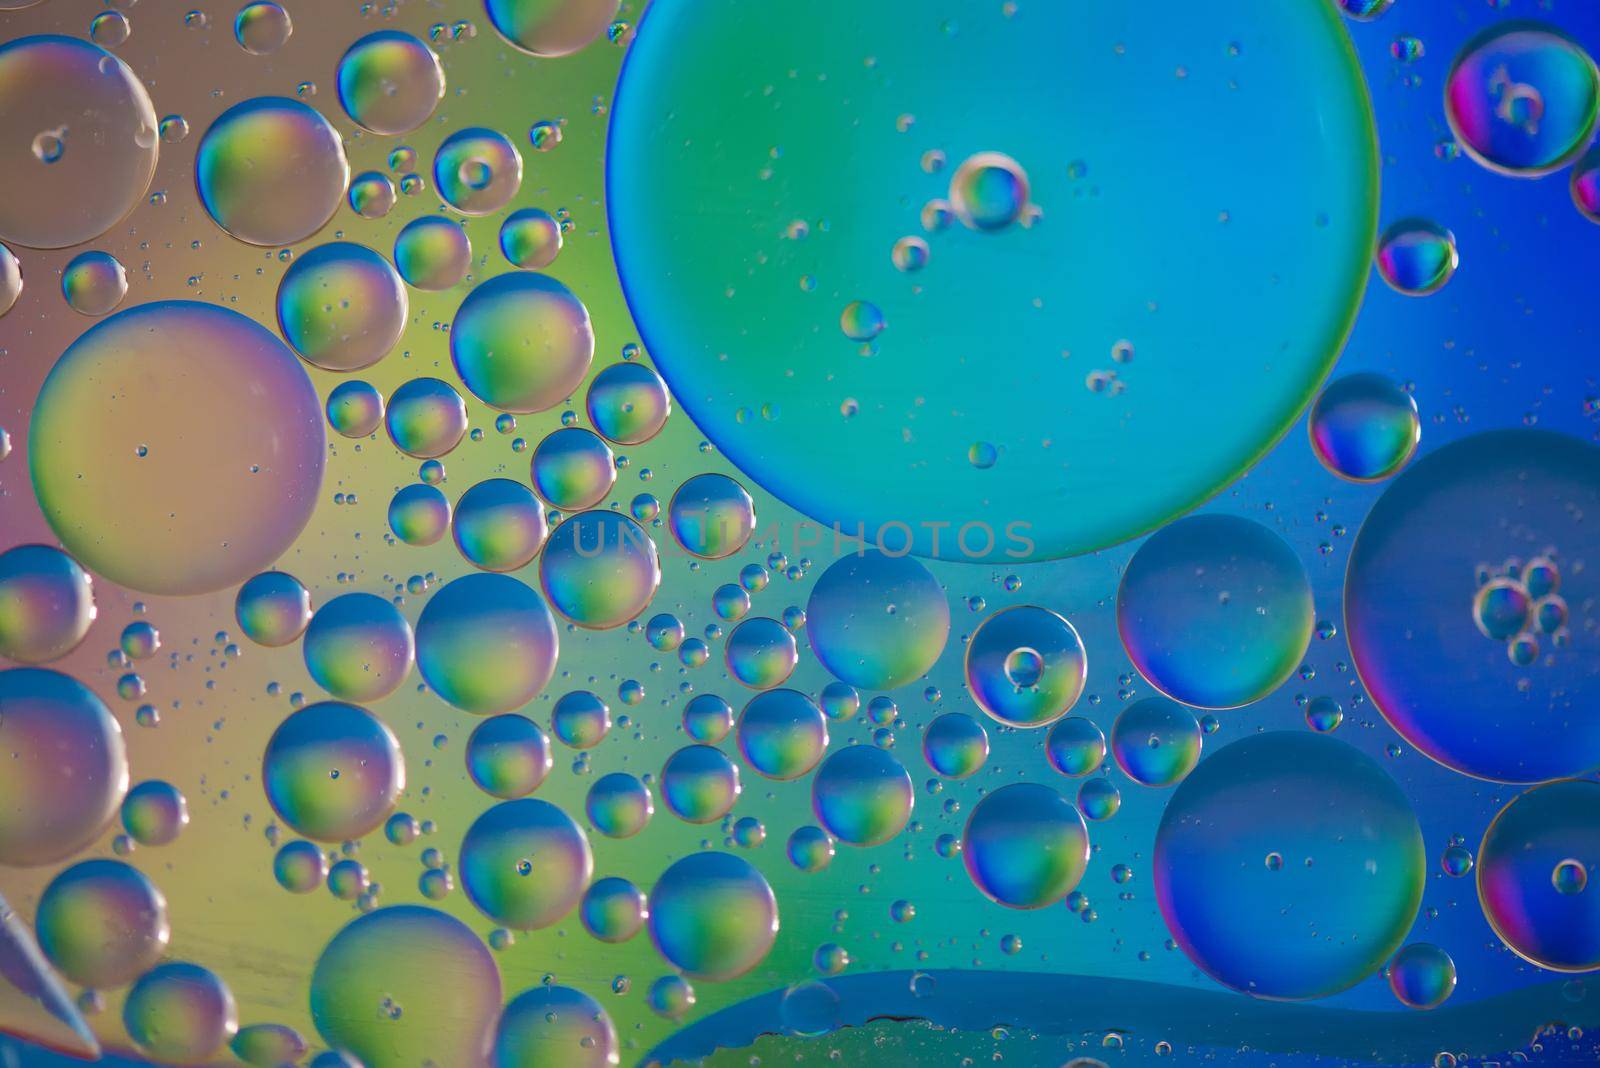 Oil drops in water. Abstract psychedelic pattern image rainbow colored. Abstract background with colorful gradient colors.